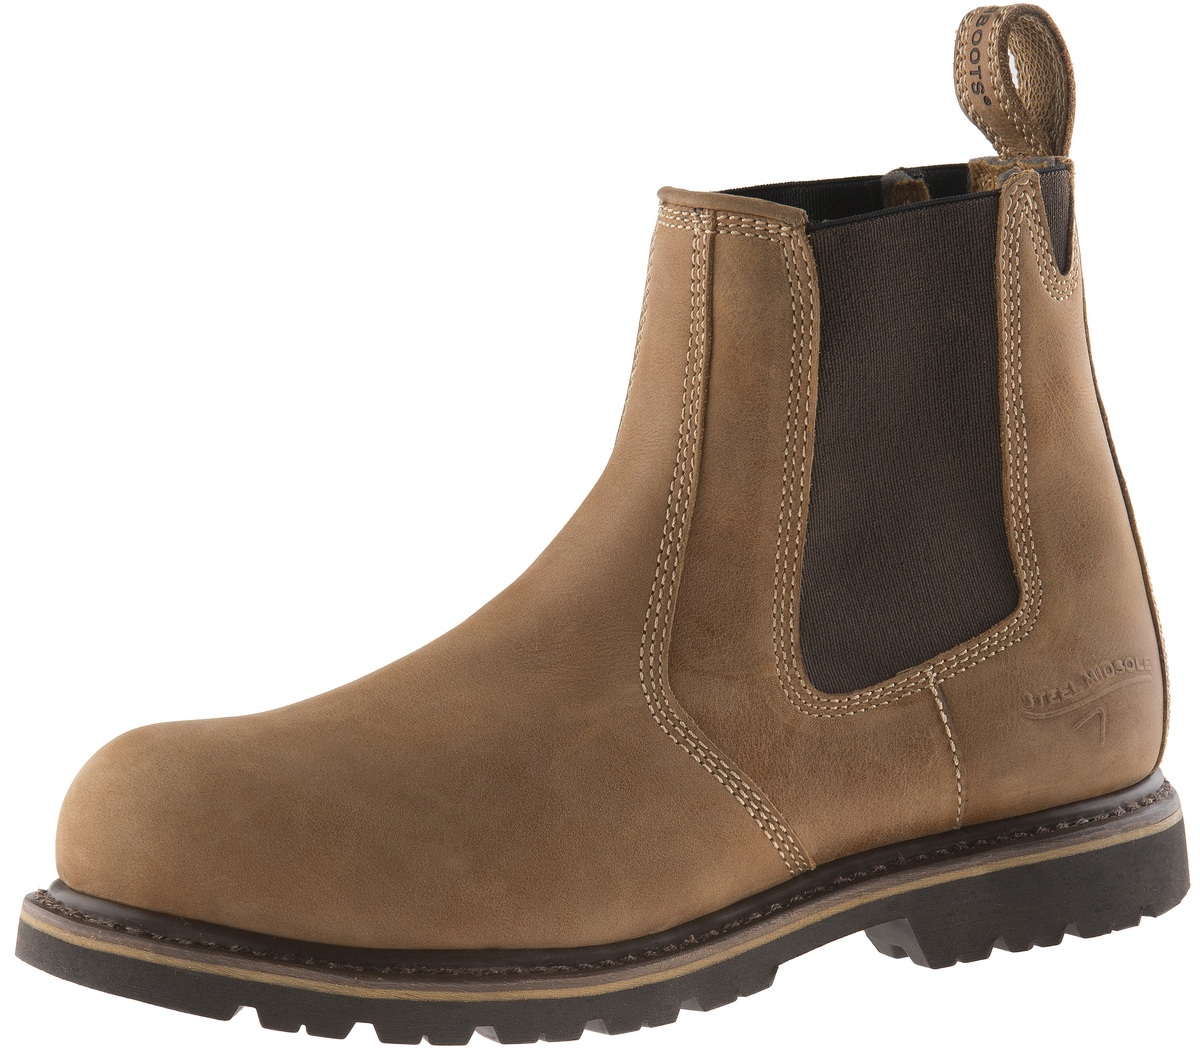 Safety Dealer boot - Goodyear Welted Safety - Dealer Boots - Buckler Boots